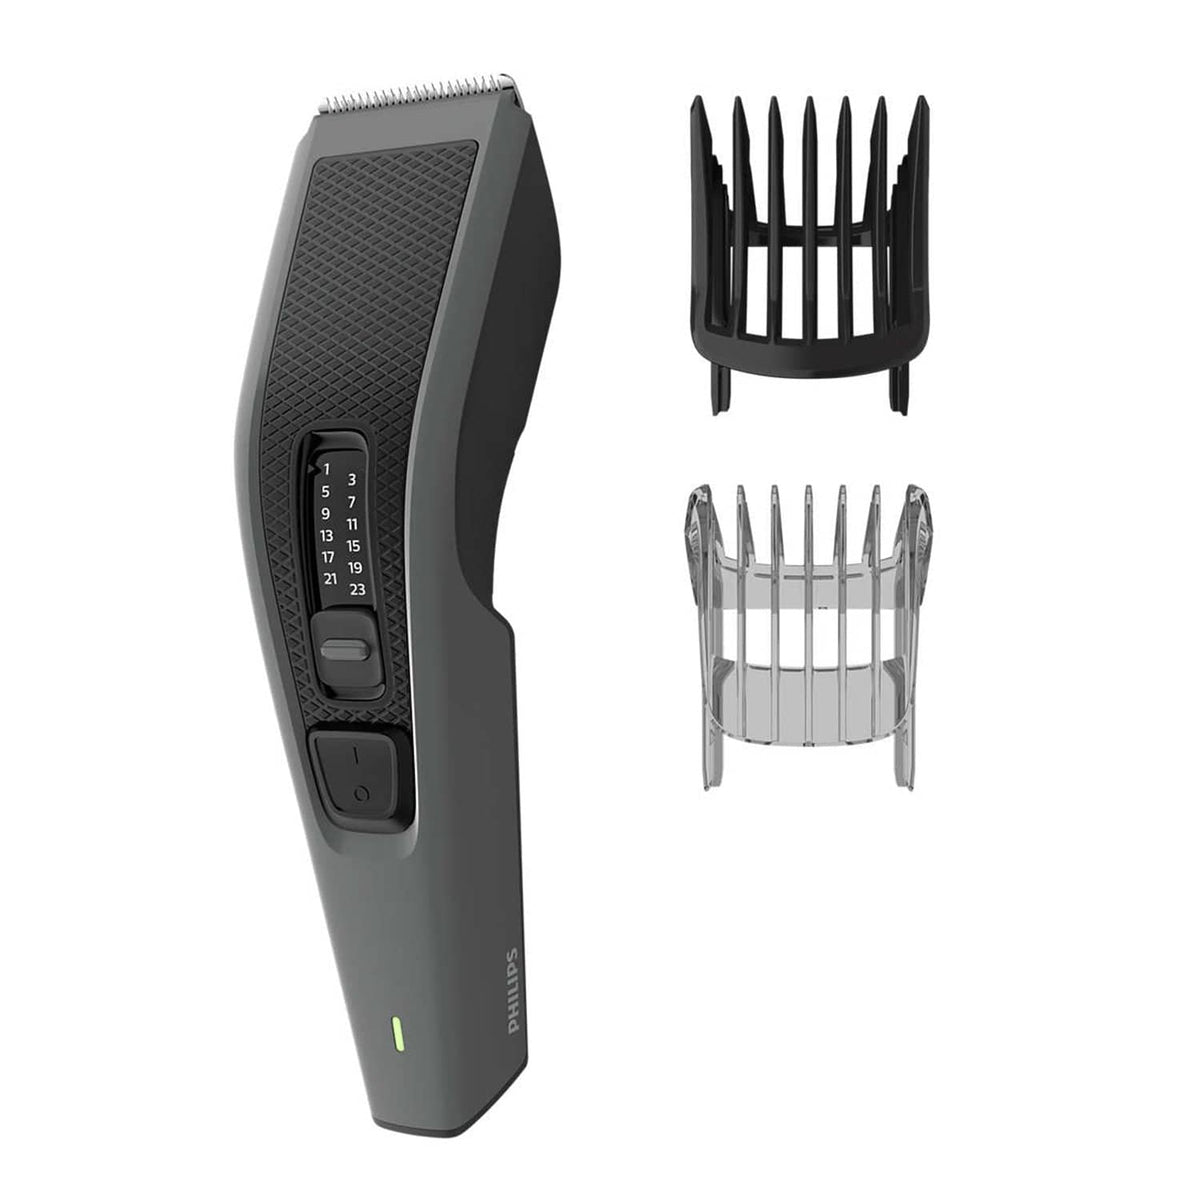 Philips HC3525/15 Series 3000 Hair Clipper / Trimmer / Shaver